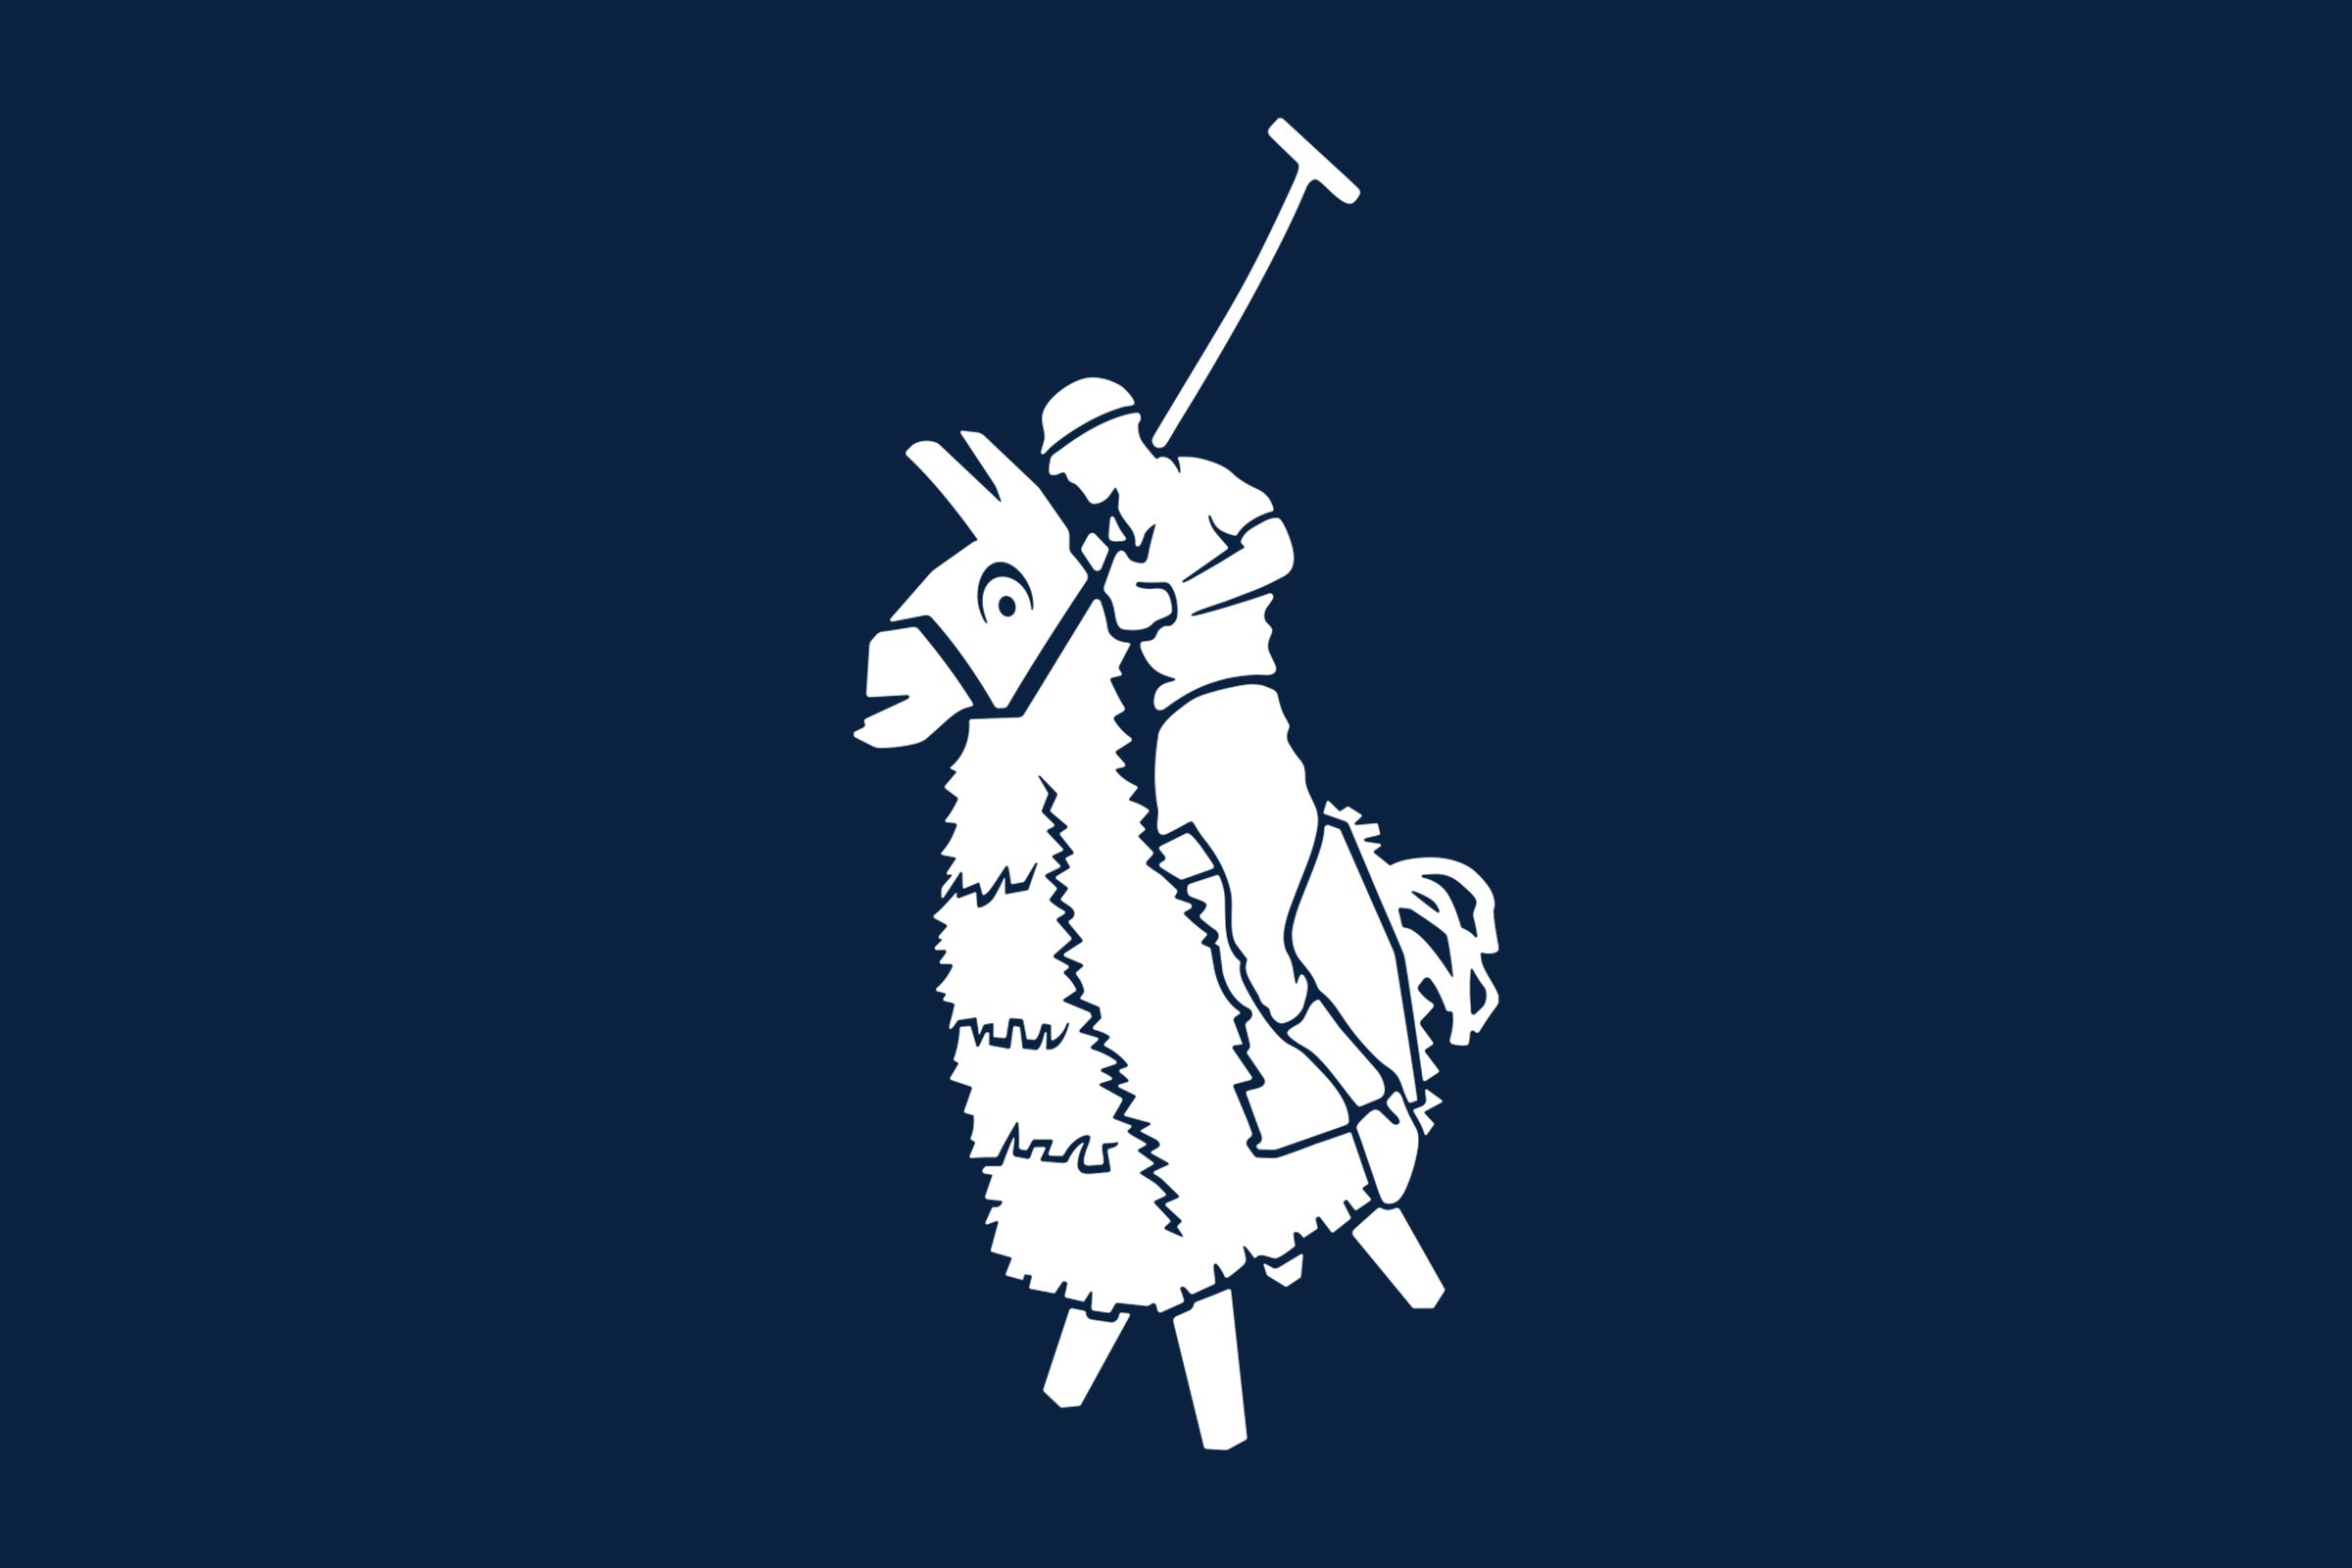 The Ralph Lauren logo redesigned with a Fortnite llama.